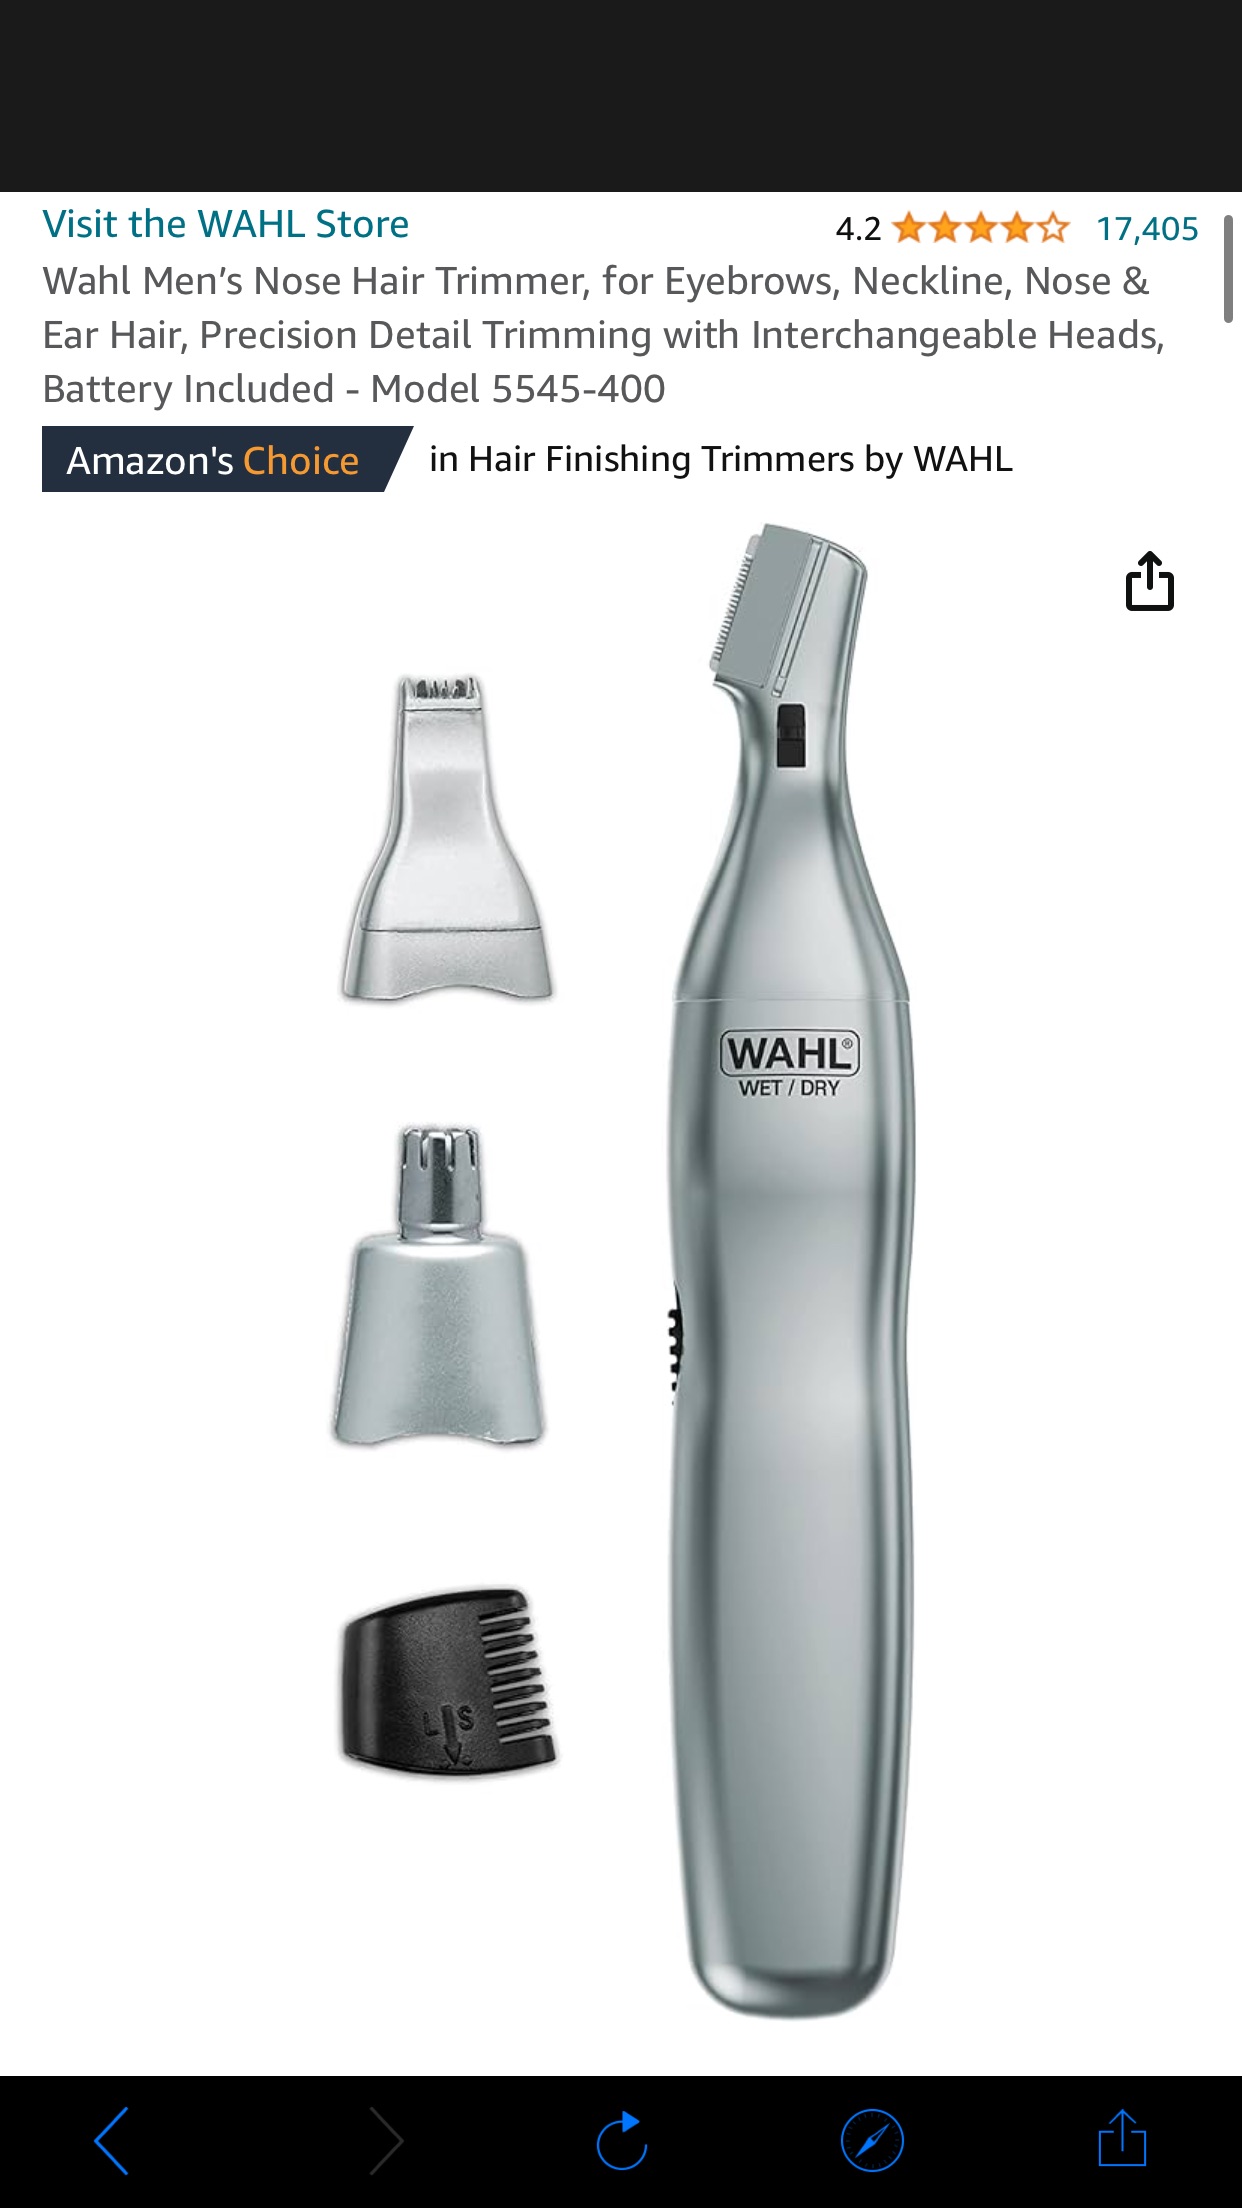 Amazon.com: Wahl Men’s Nose Hair Trimmer, for Eyebrows, Neckline, Nose & Ear Hair, Precision Detail Trimming with Interchangeable Heads, Battery Included - Model 5545-400